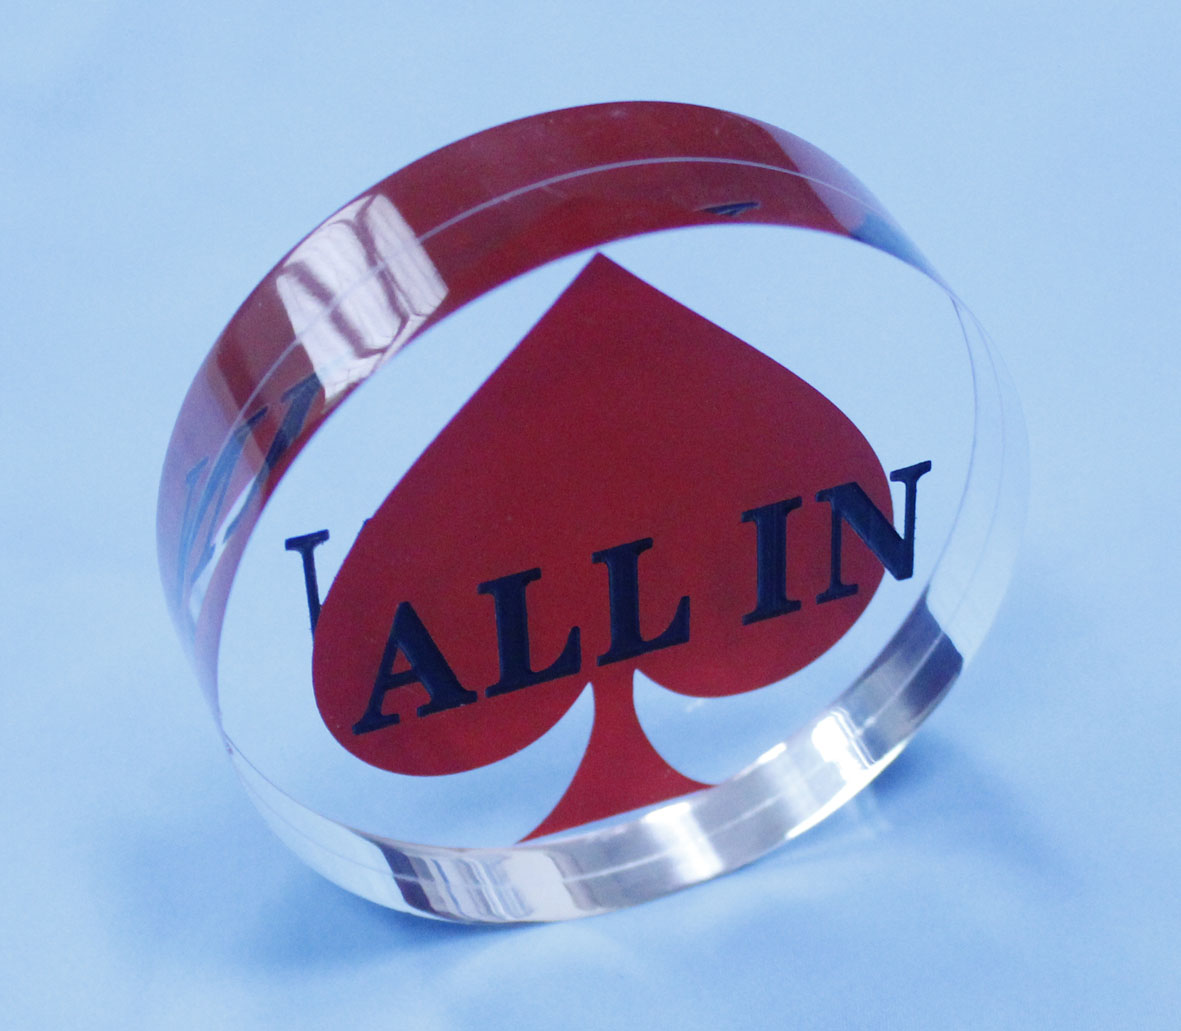 ALL-IN